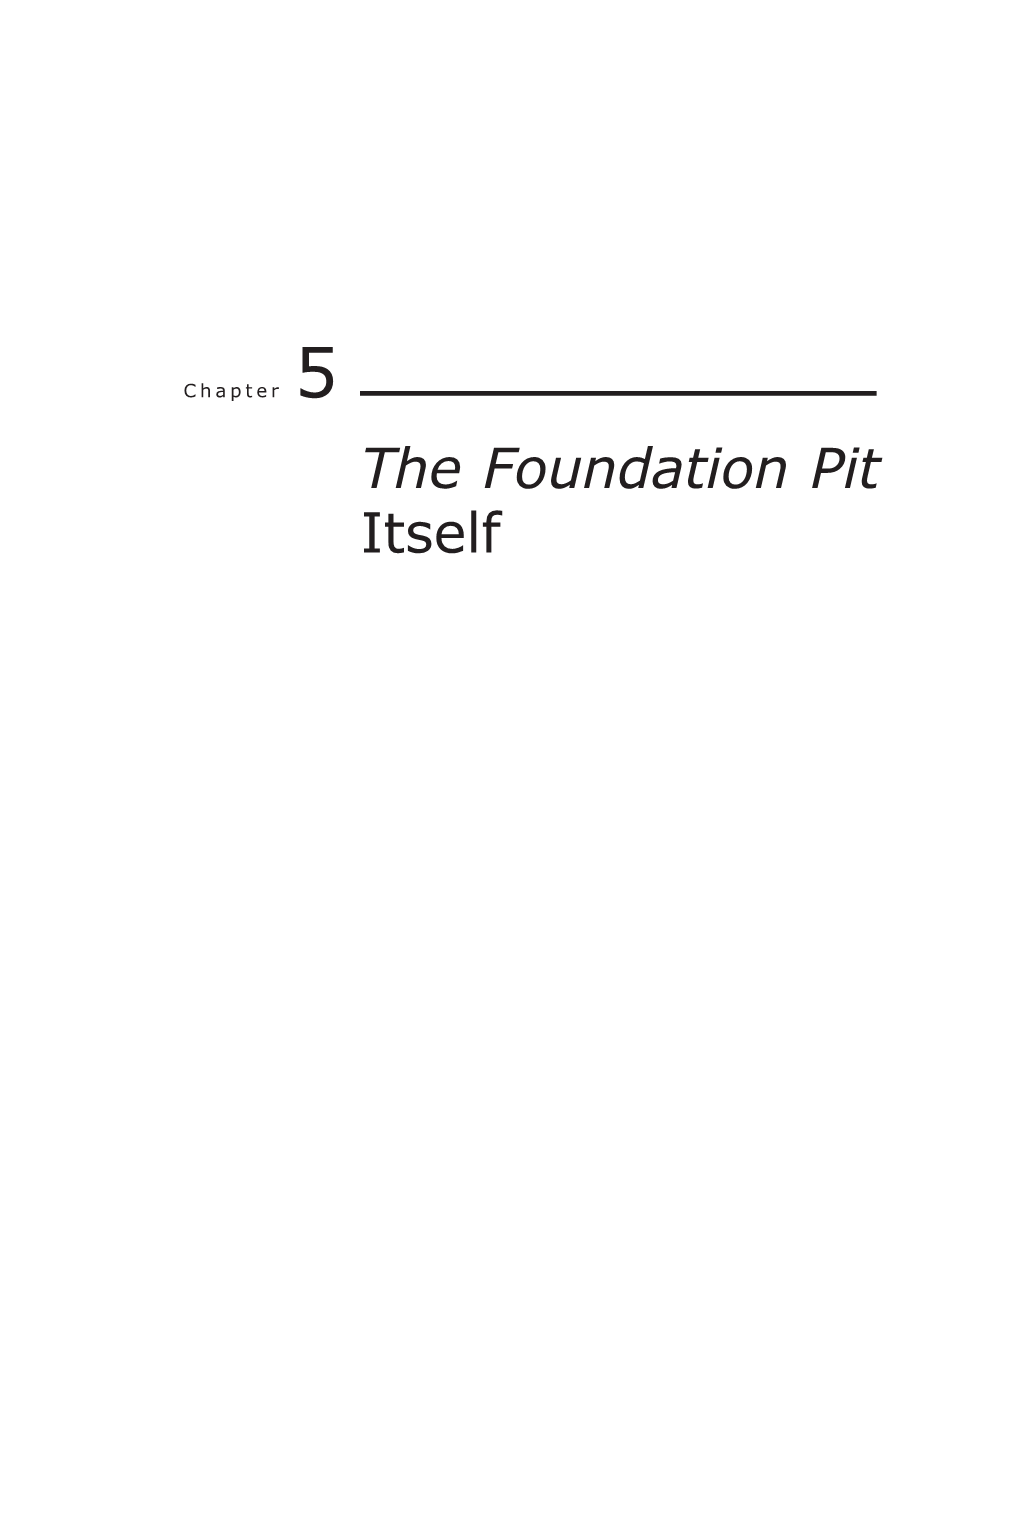 The Foundation Pit Itself